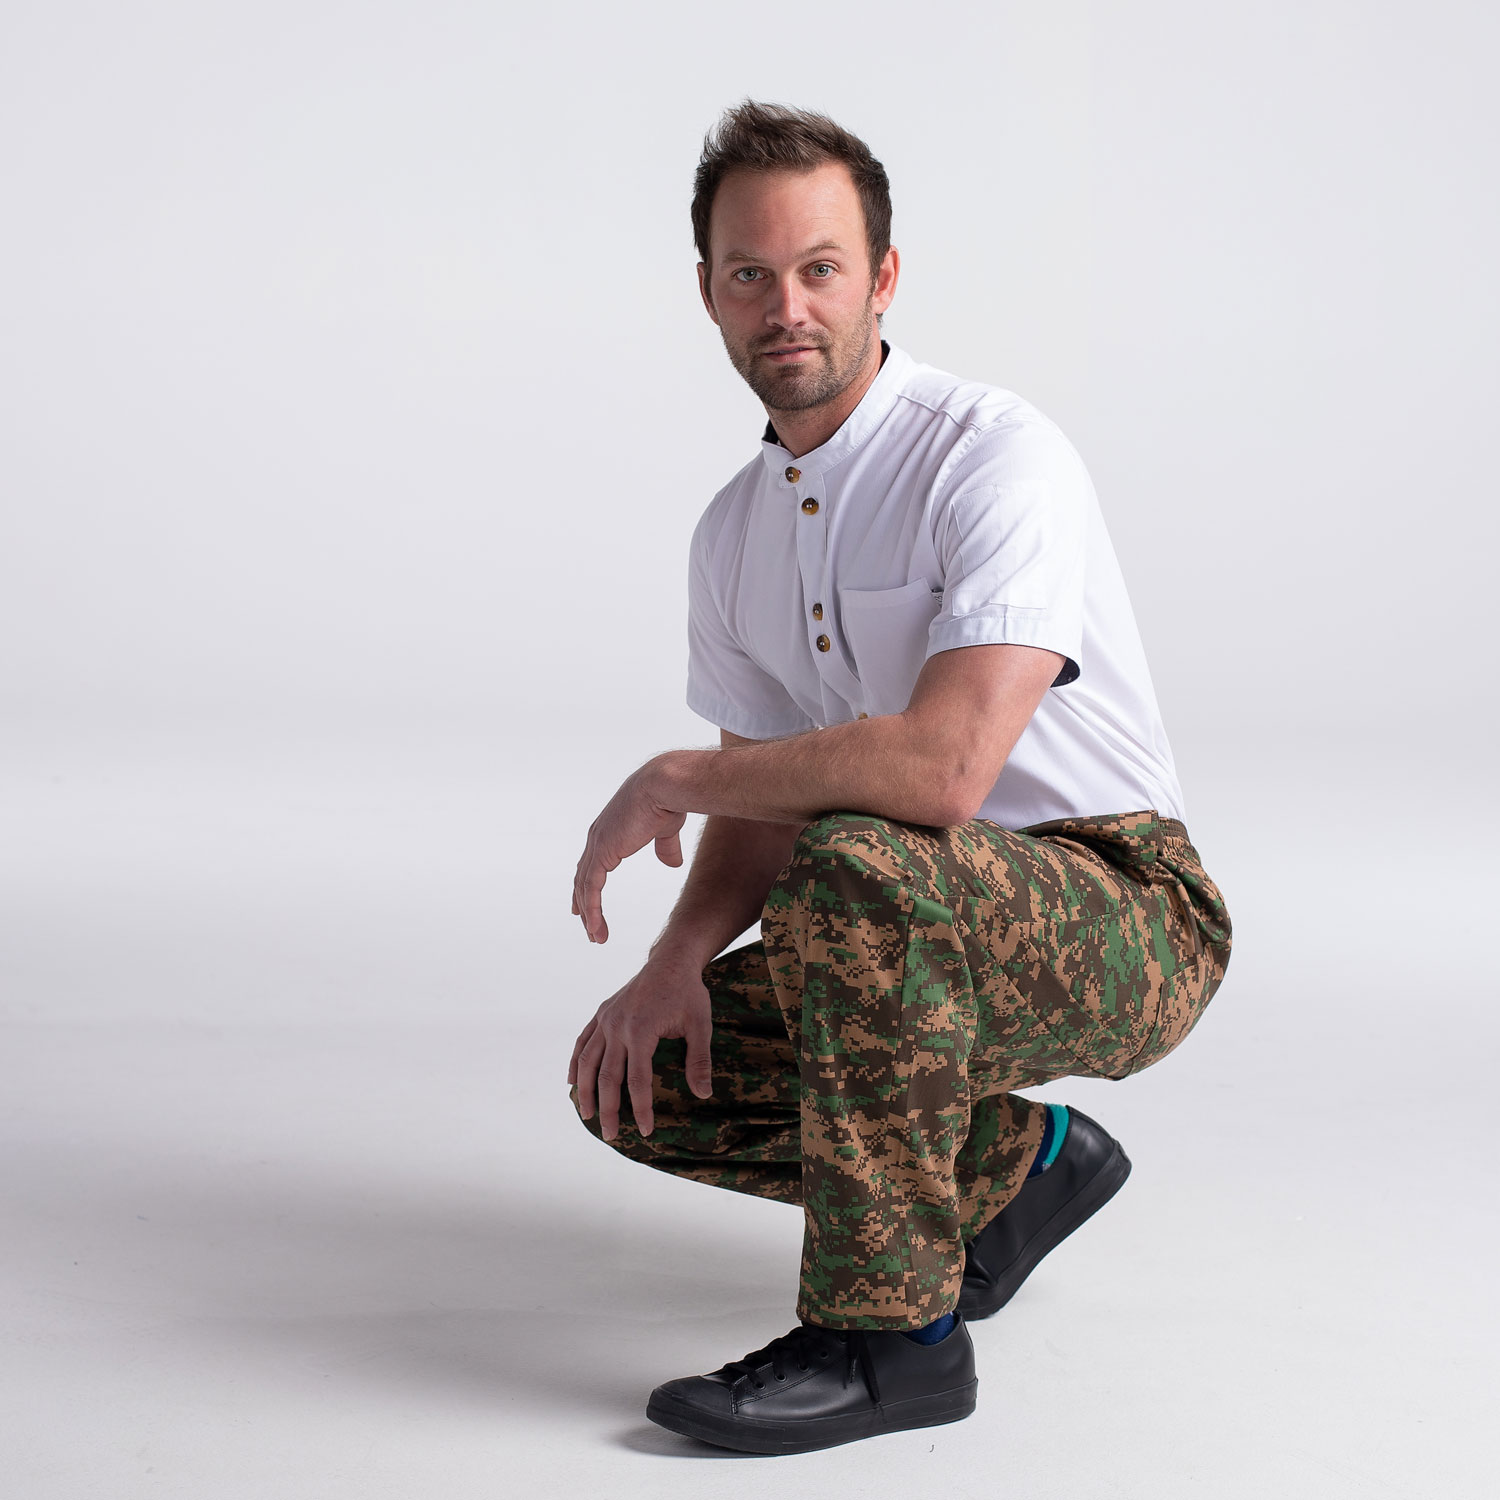 Ultimate Cotton Chef Pant